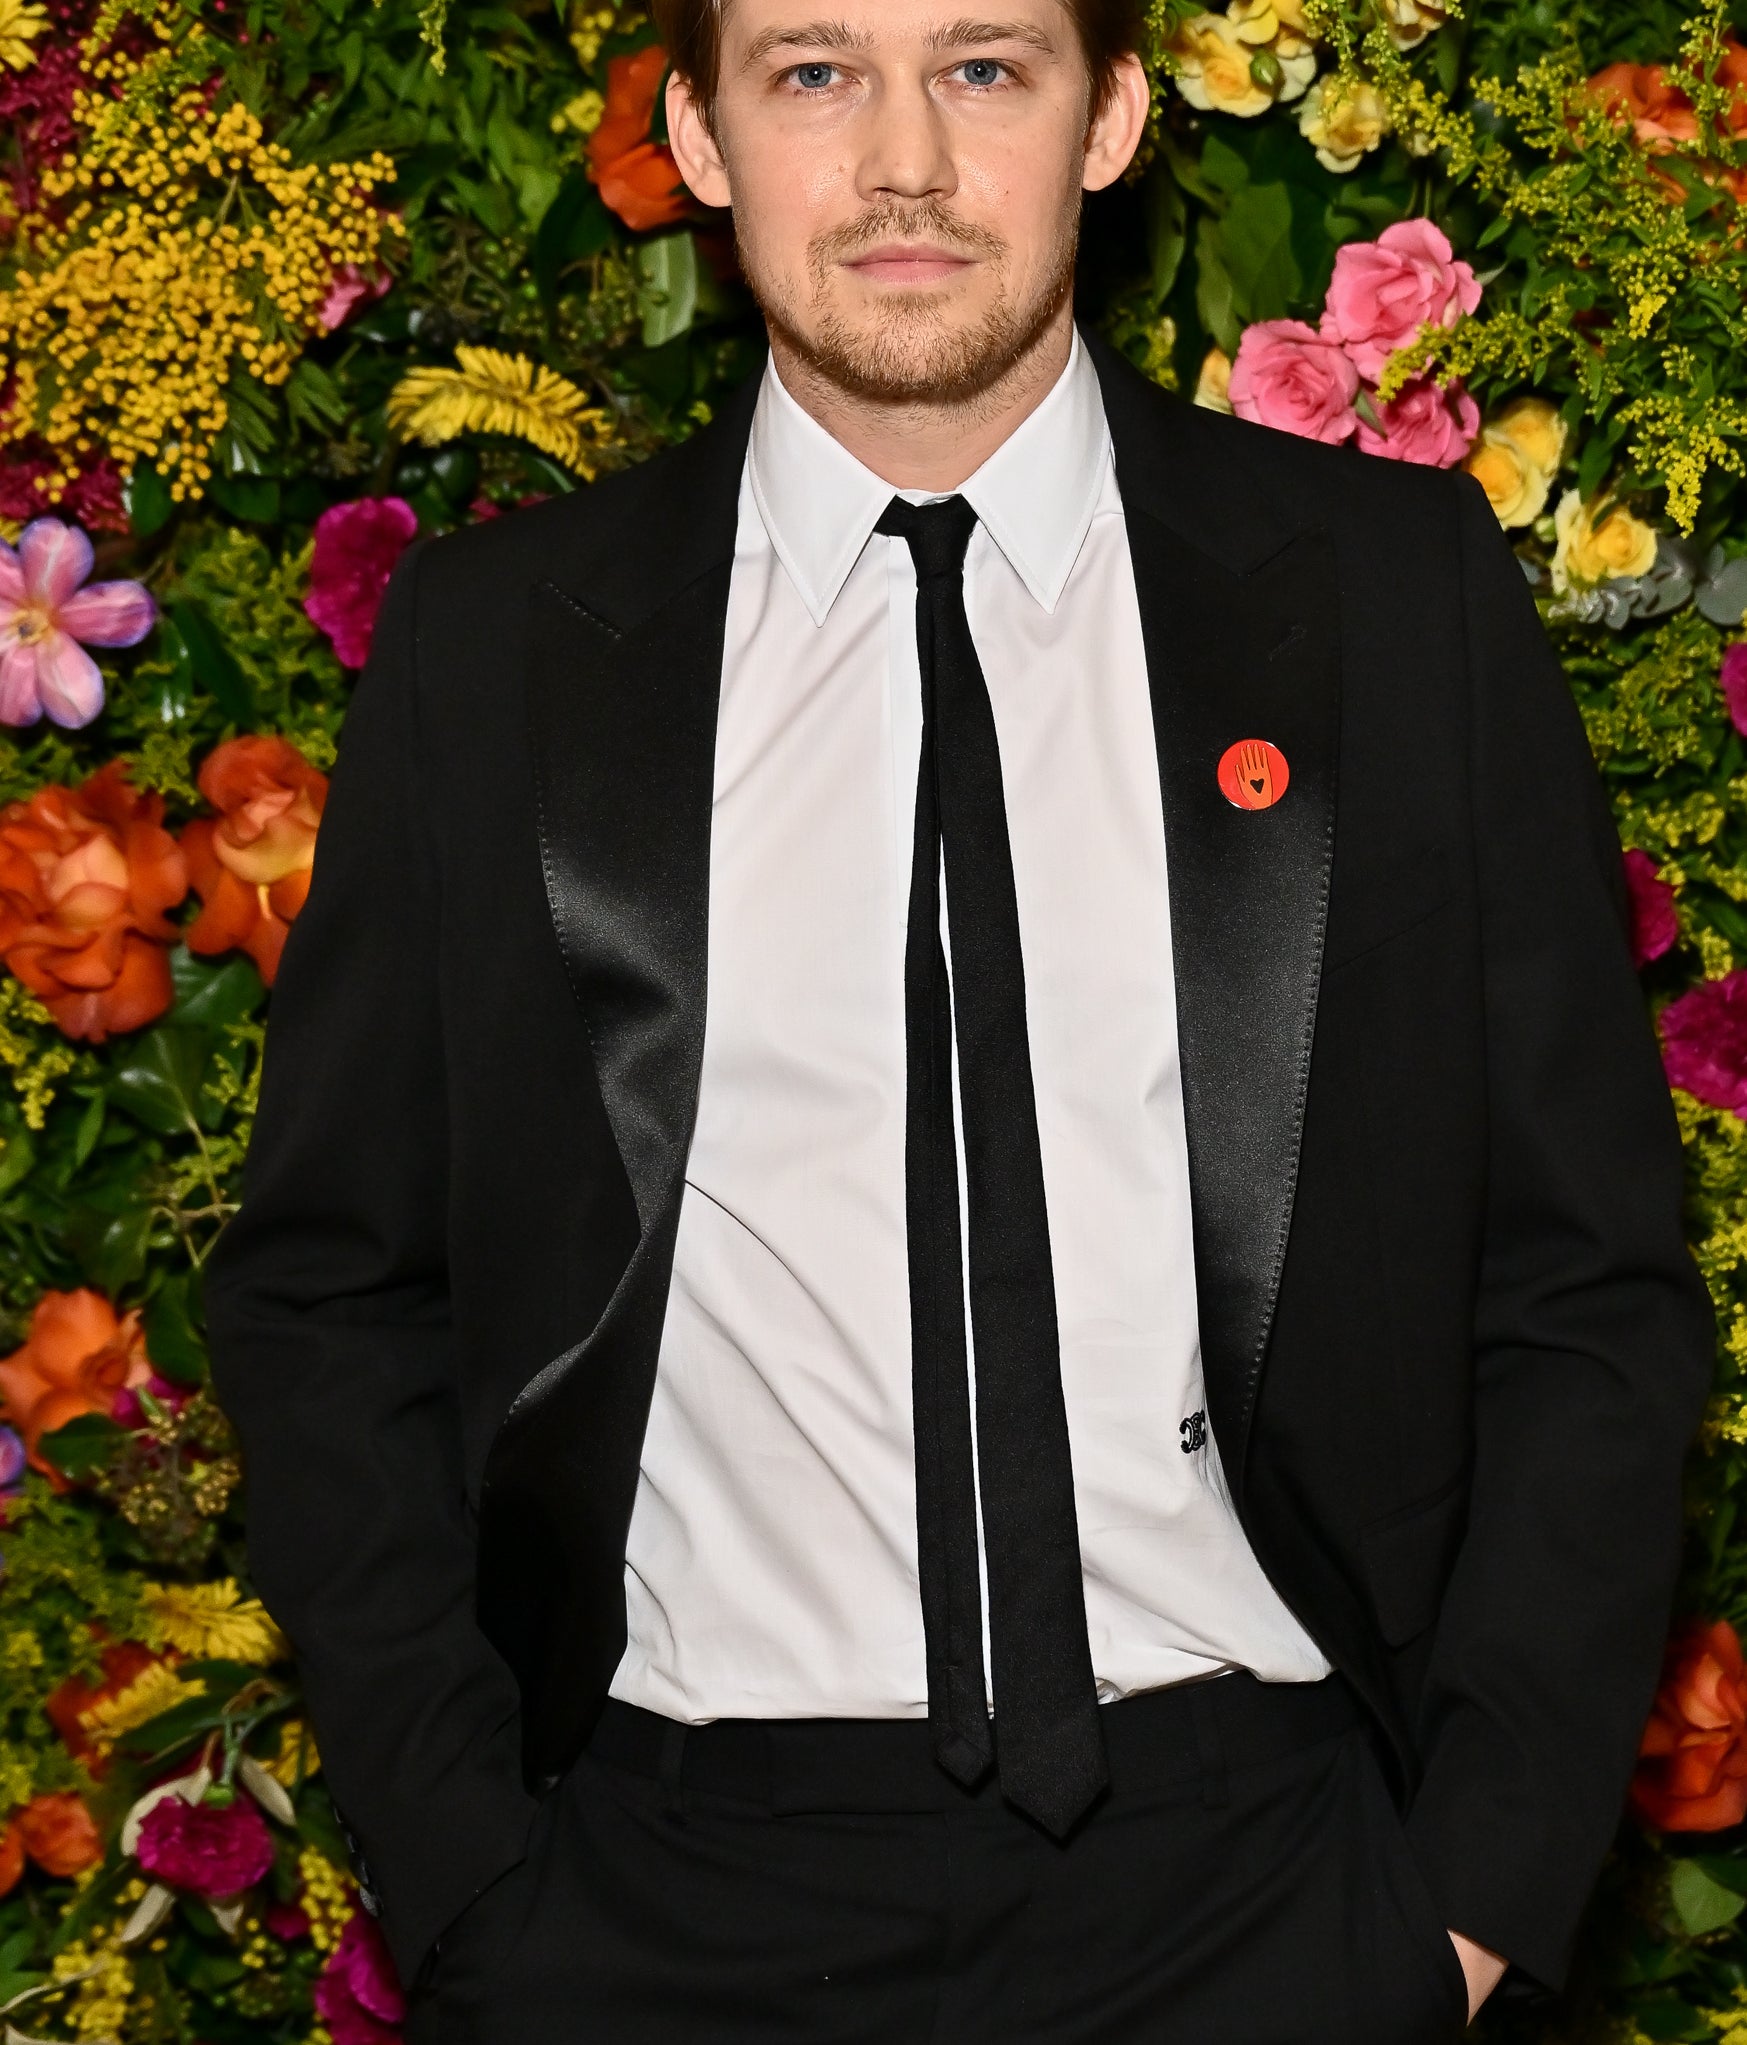 Joe Alwyn standing in front of a floral backdrop wearing a black suit with a white shirt and black tie